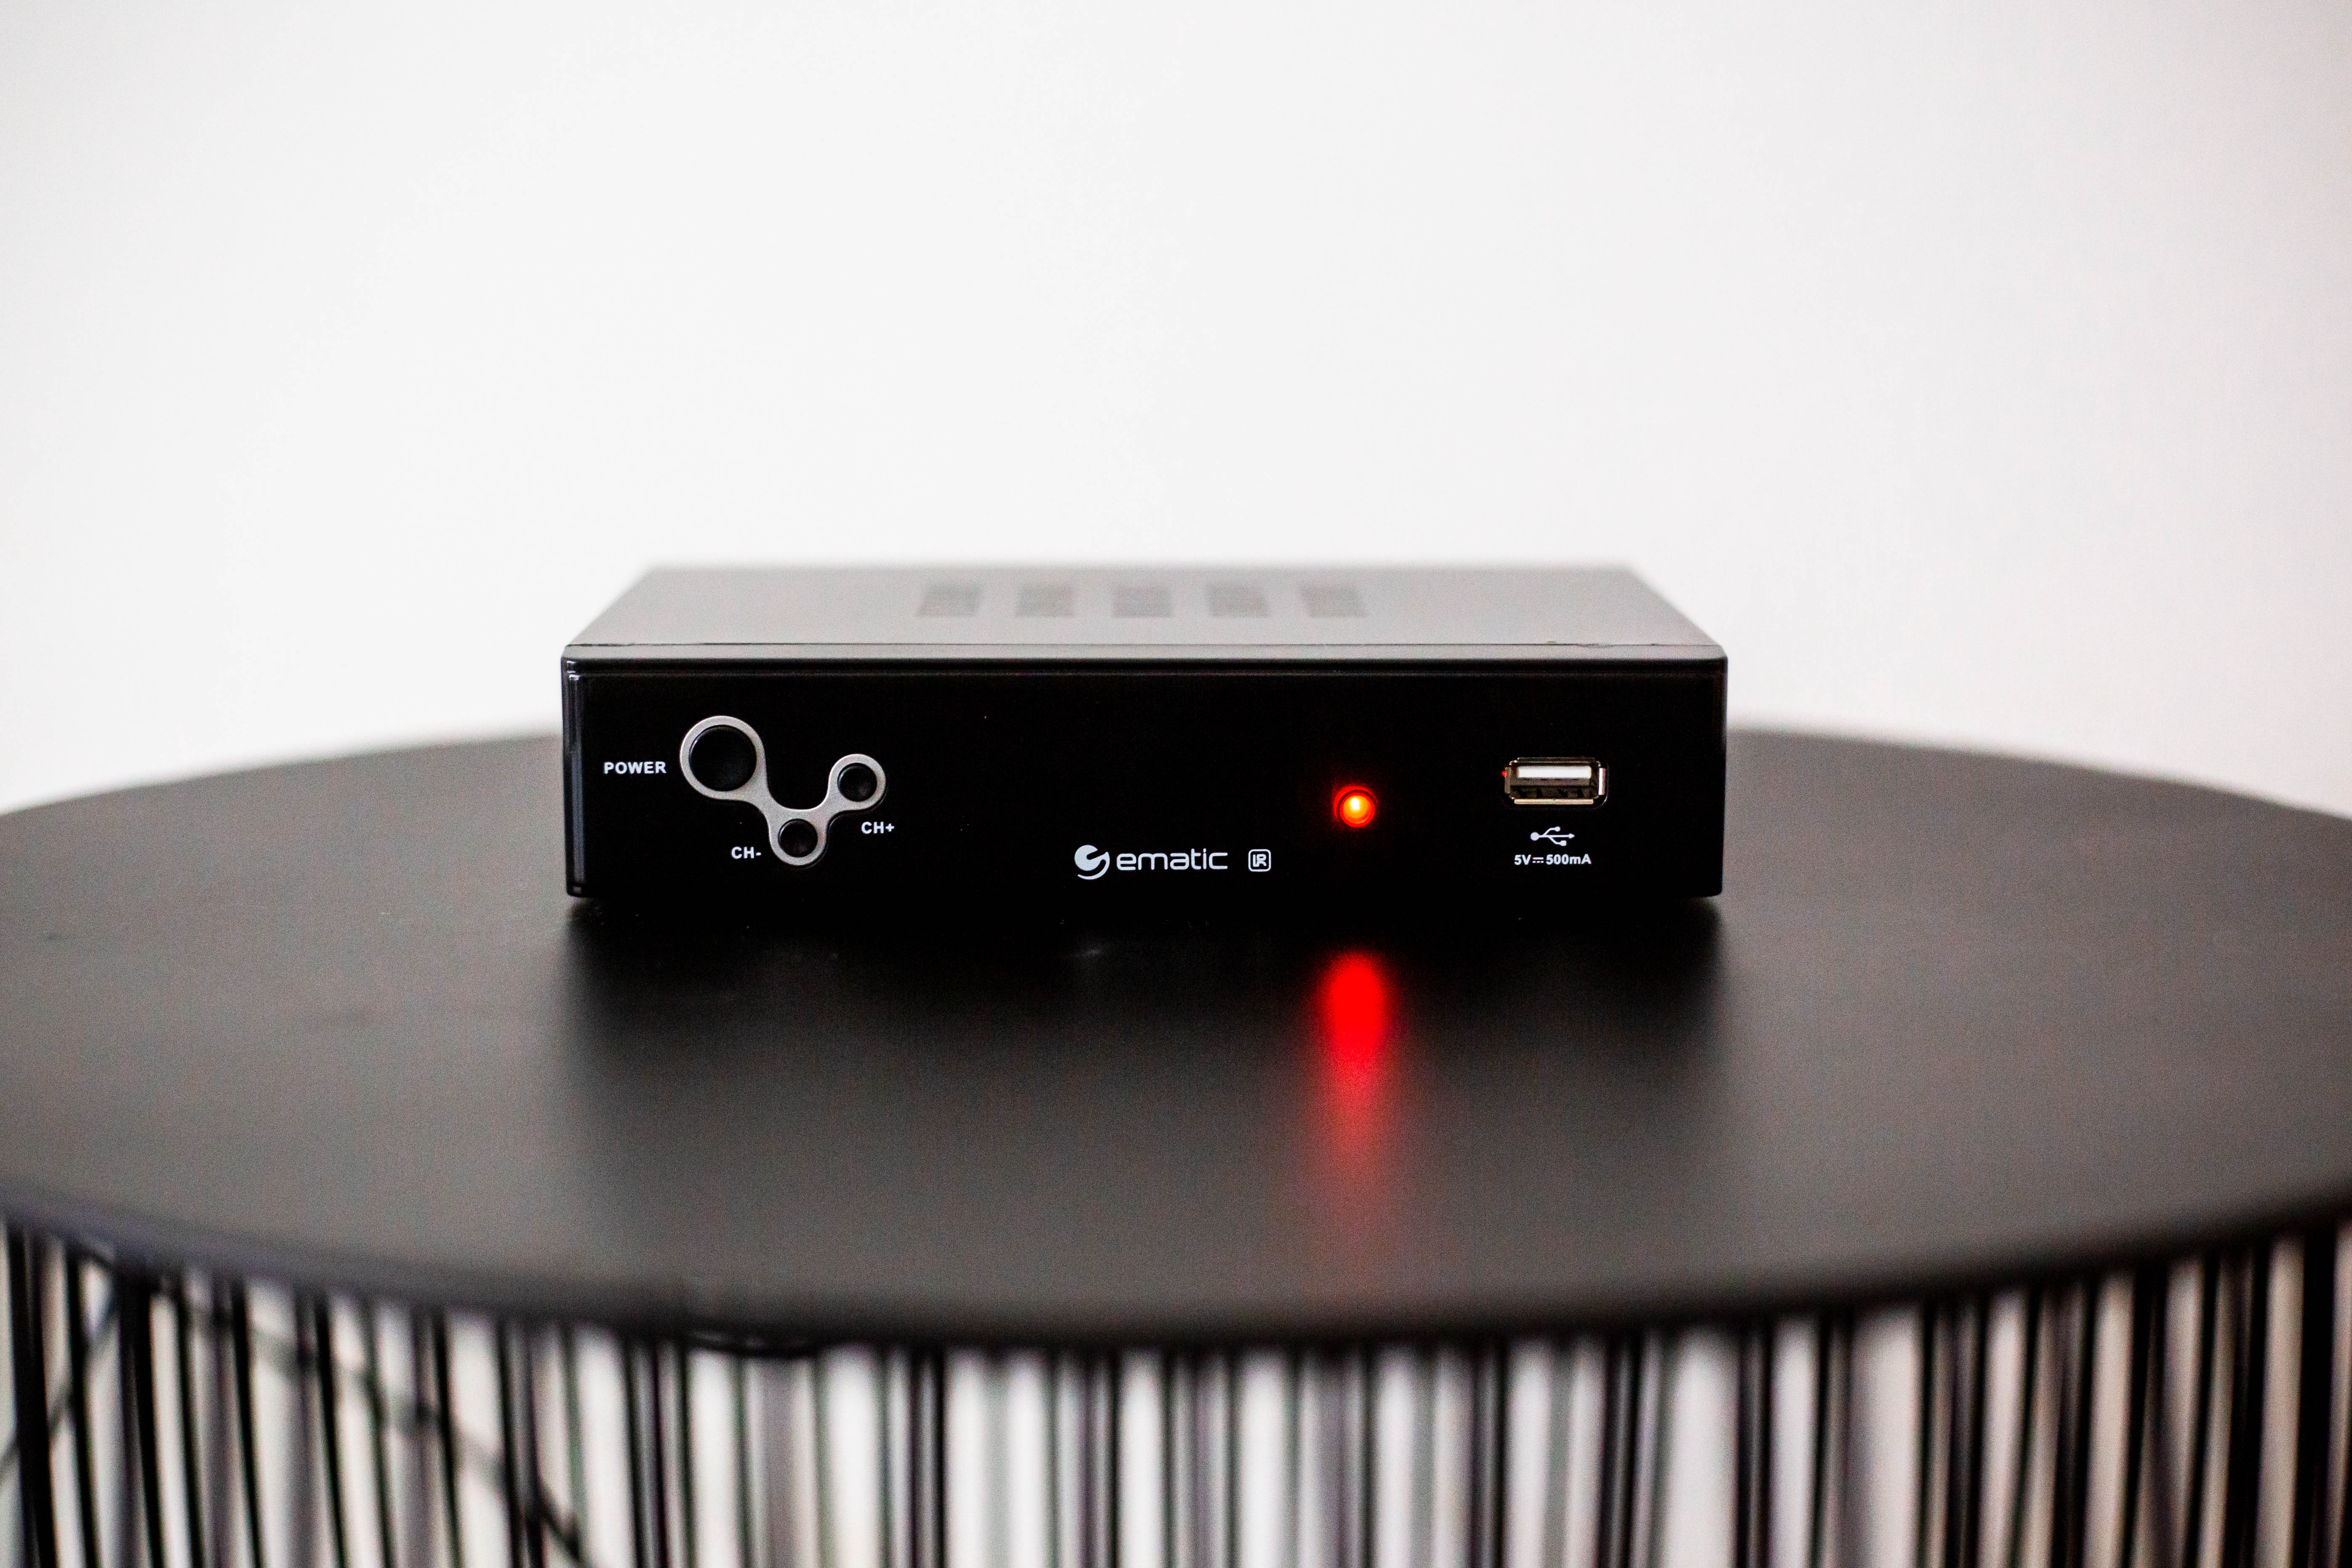 Ematic AT103B Digital Converter Box with LED Display and Recording Capabilities - image 5 of 13